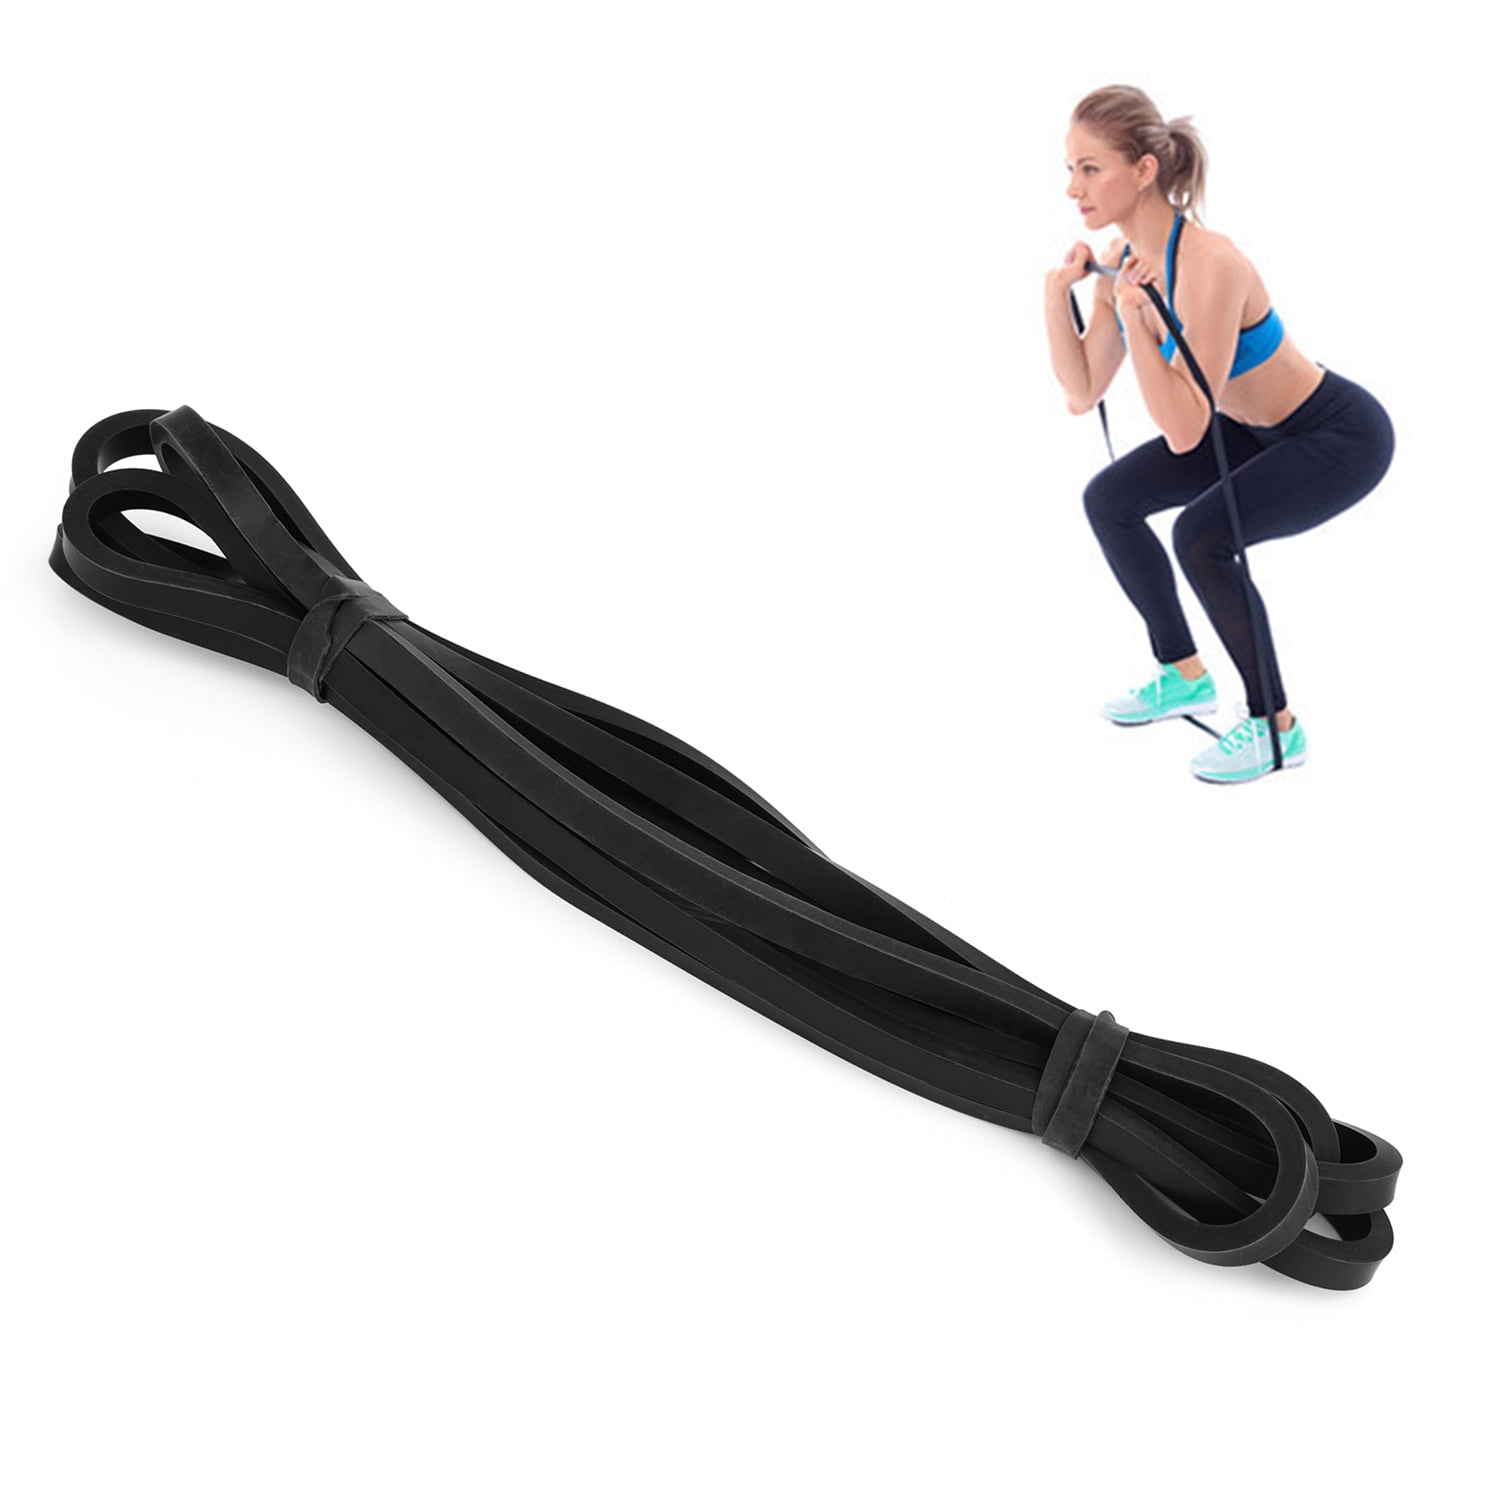 GYM Latex Exercise Bands Resistance Elastic Band Pull Up Assist Bands Fitness 